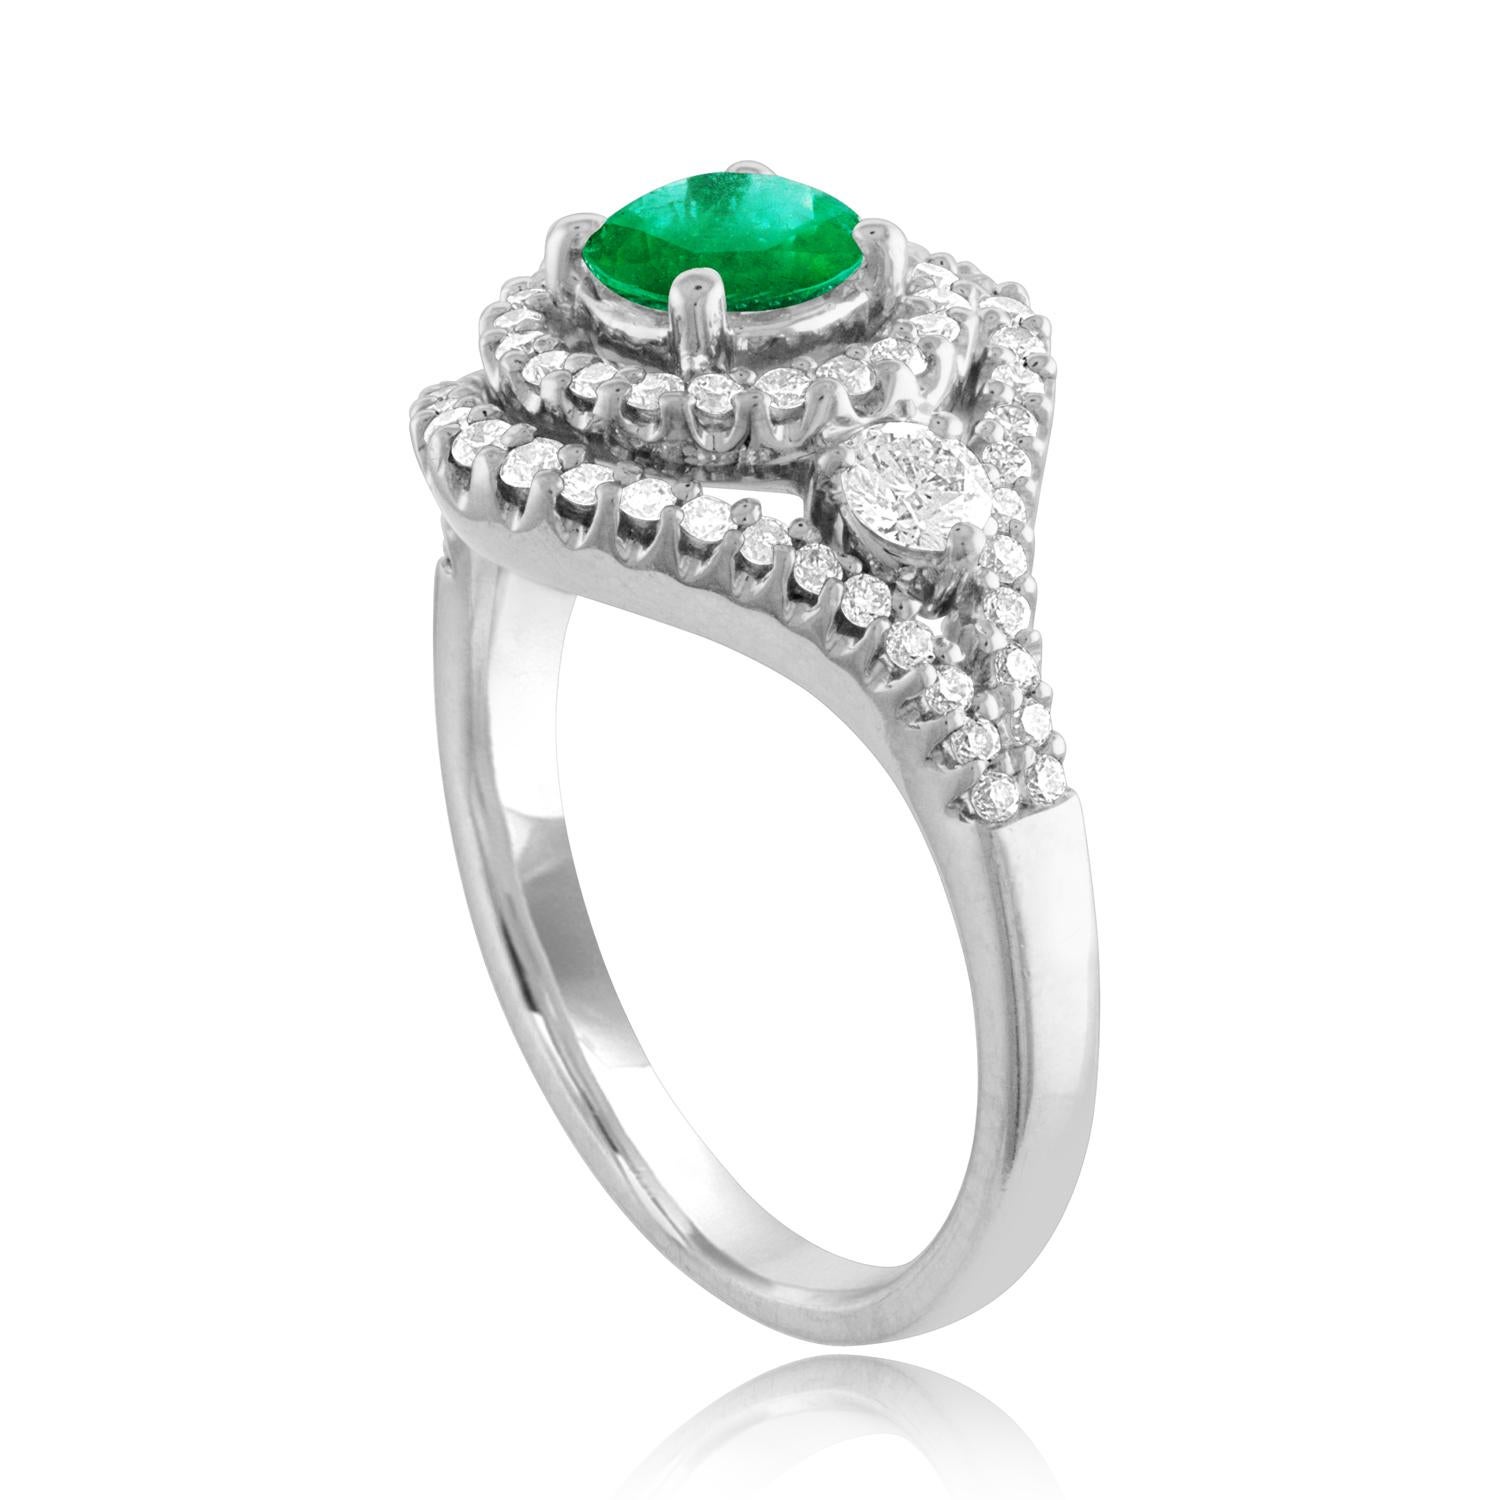 Beautiful Double Halo Emerald Ring
The ring is 18K White Gold.
The Center is a beautiful round cut 0.78 Carat Emerald.
The Emerald is AGL certified.
There are 1.07 Carats in Diamonds F/G VS/SI
The ring is a size 7.00, sizable.
The ring weighs 6.8